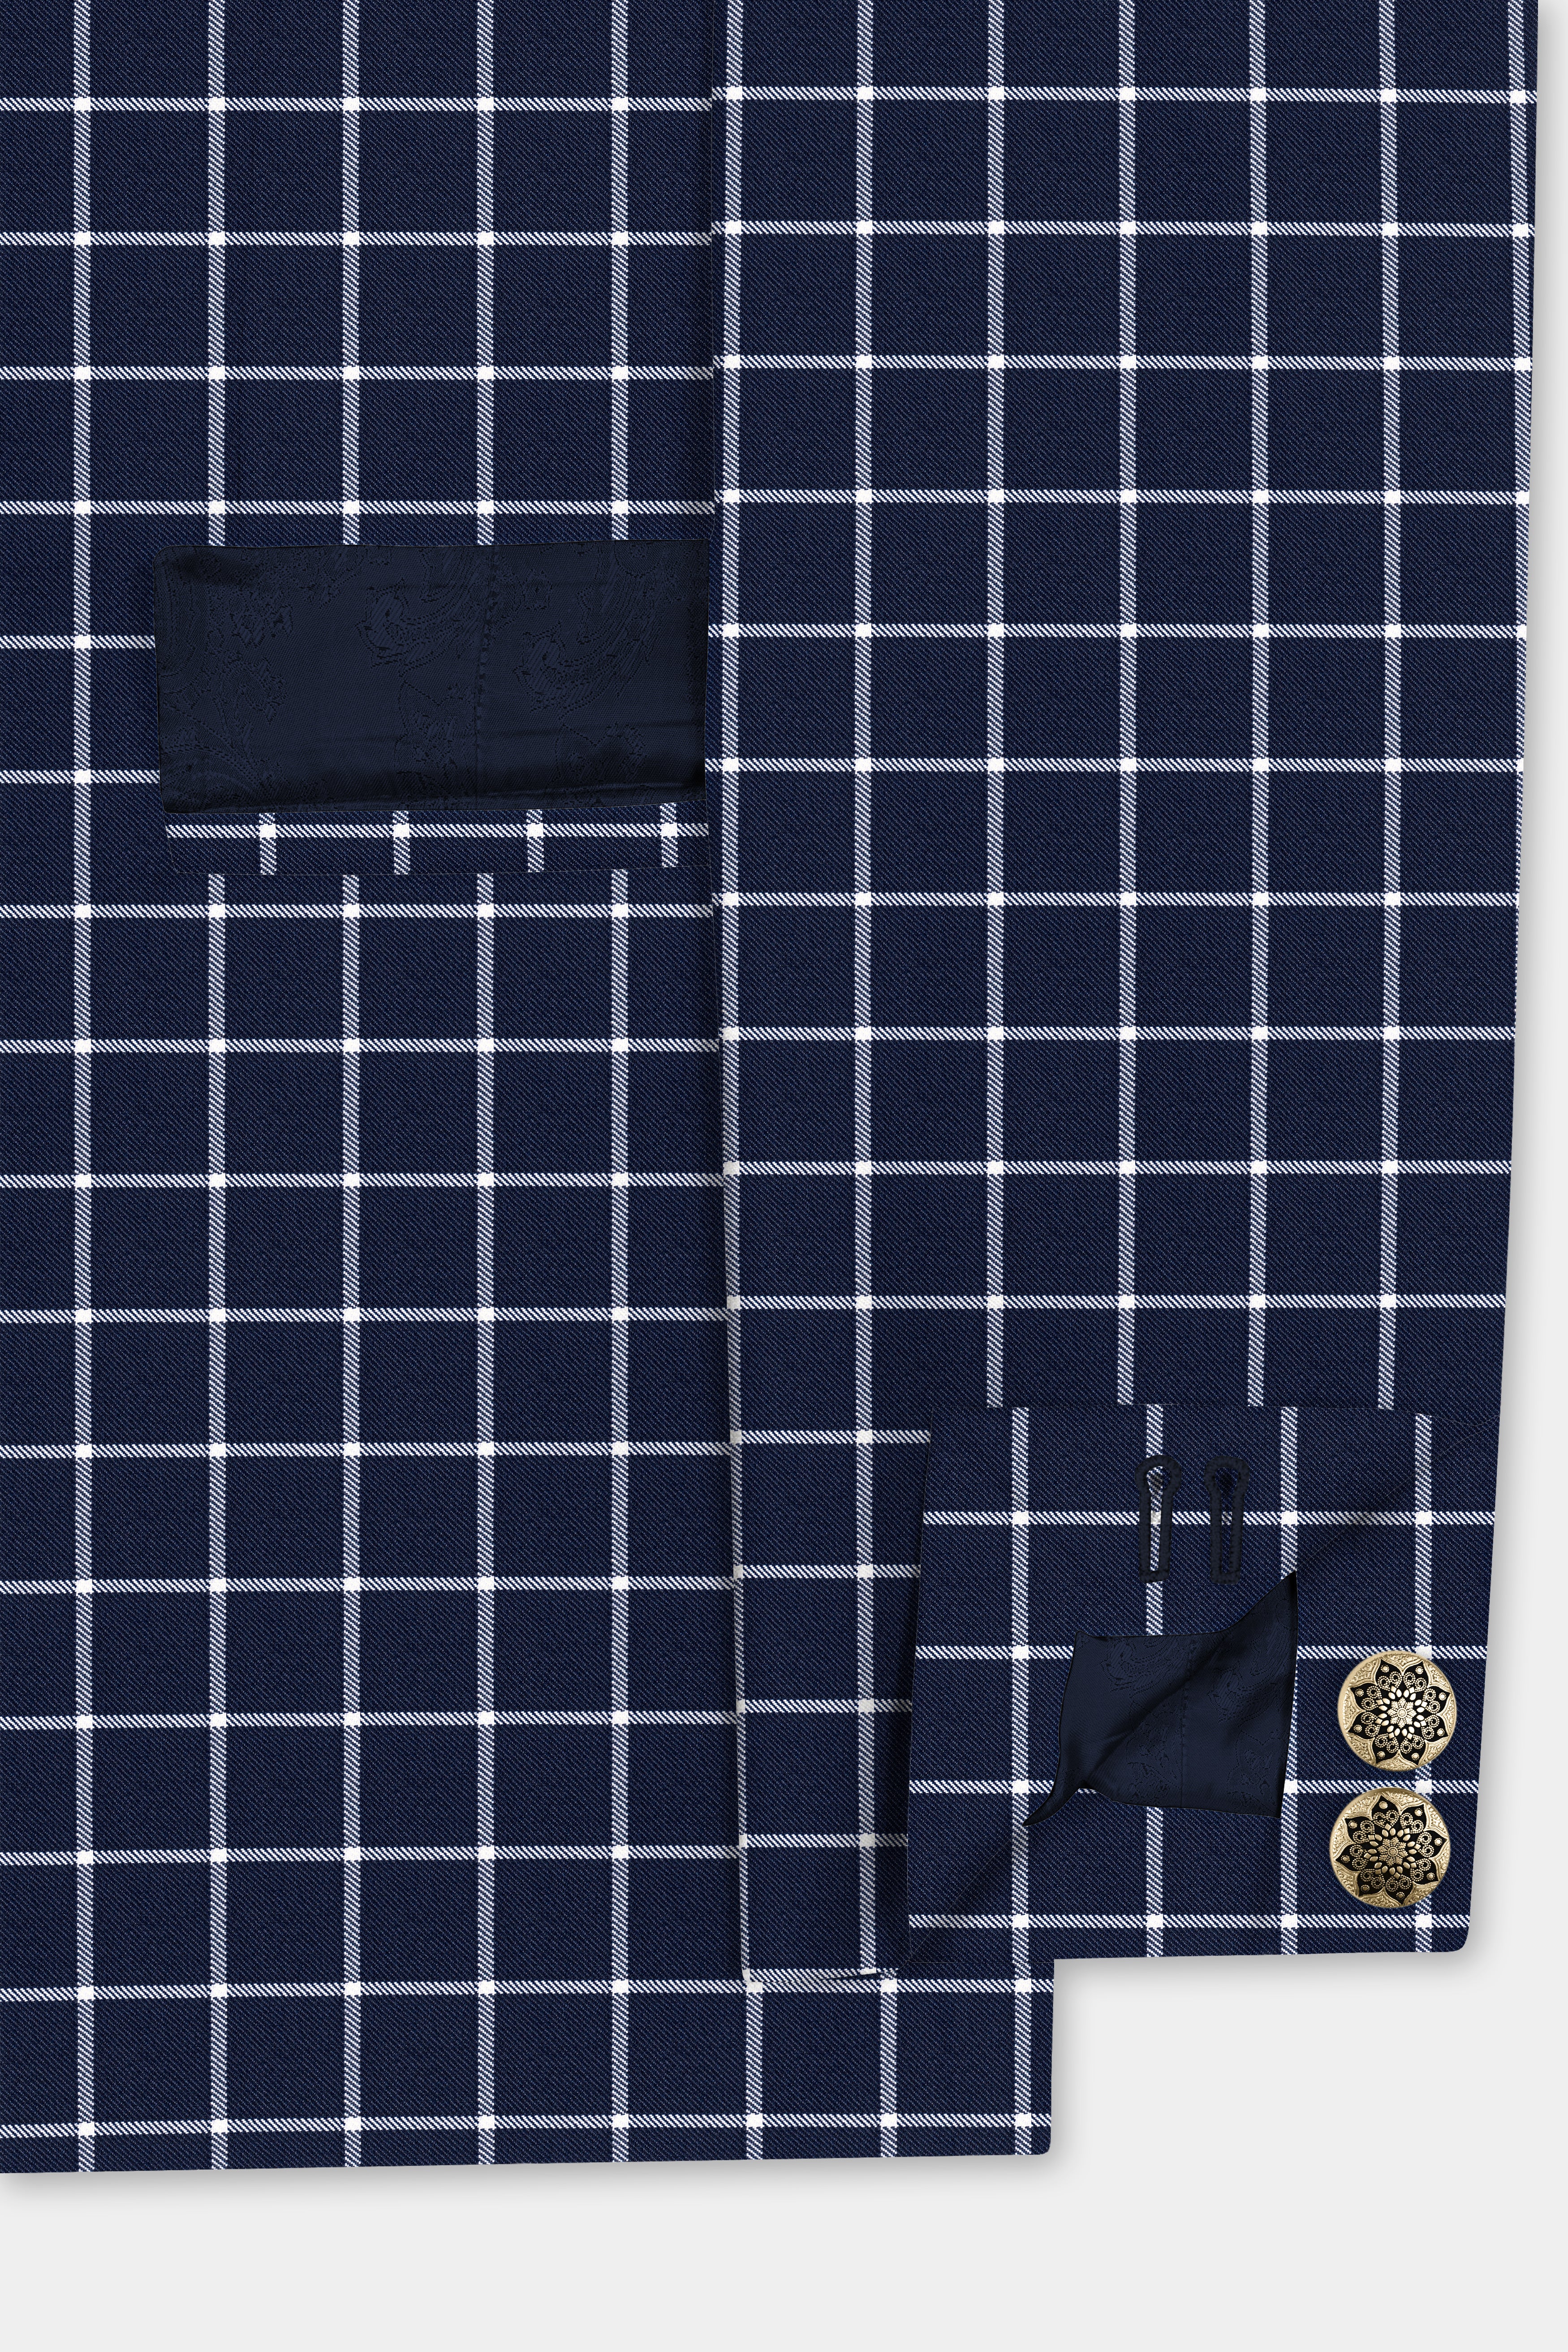 Admiral Blue and White Windowpane Wool Rich Cross Placket Bandhgala Suit